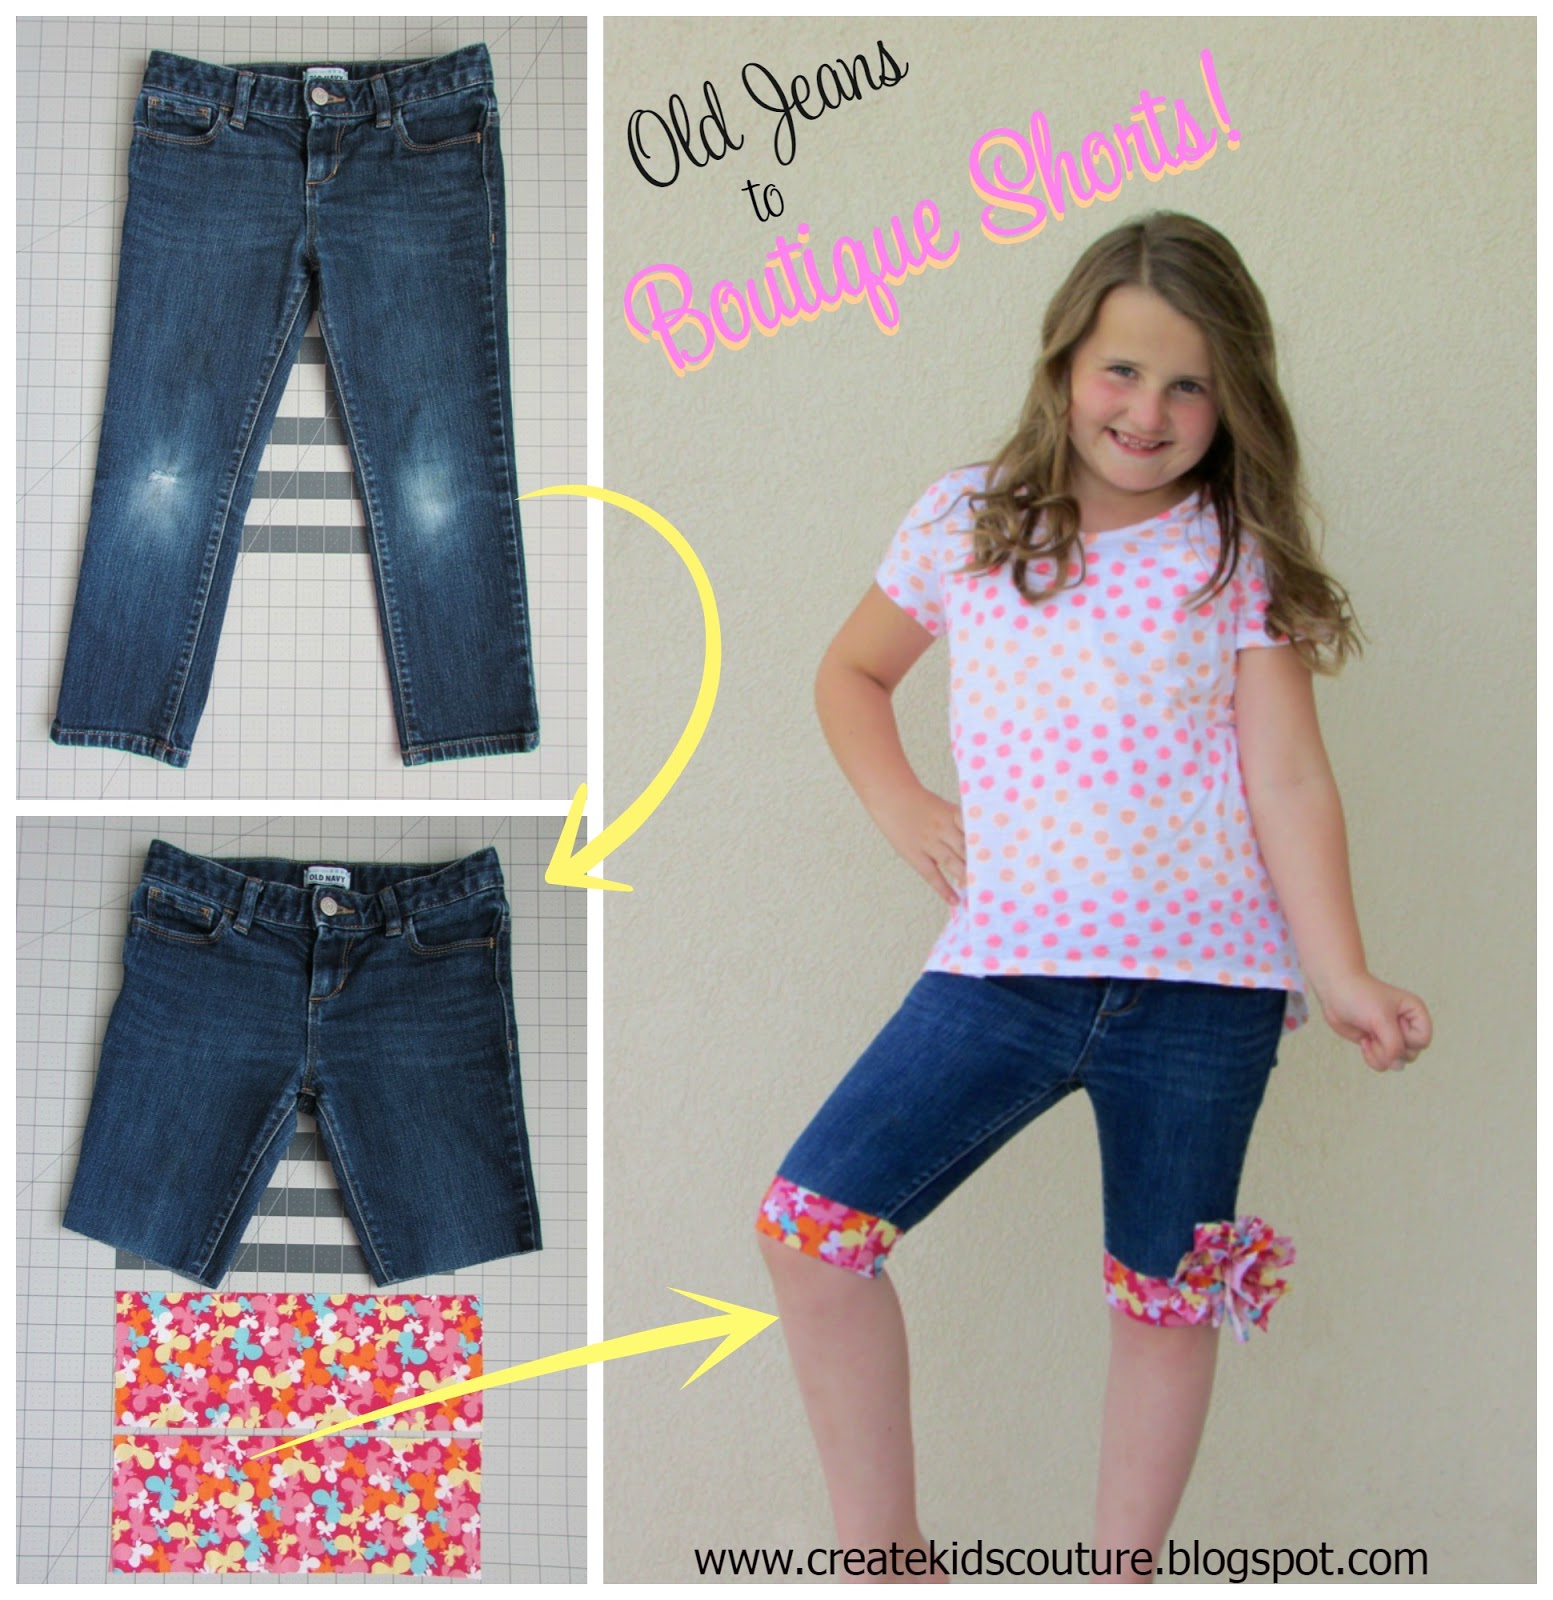 Upcycle Old Jeans into Boutique Shorts